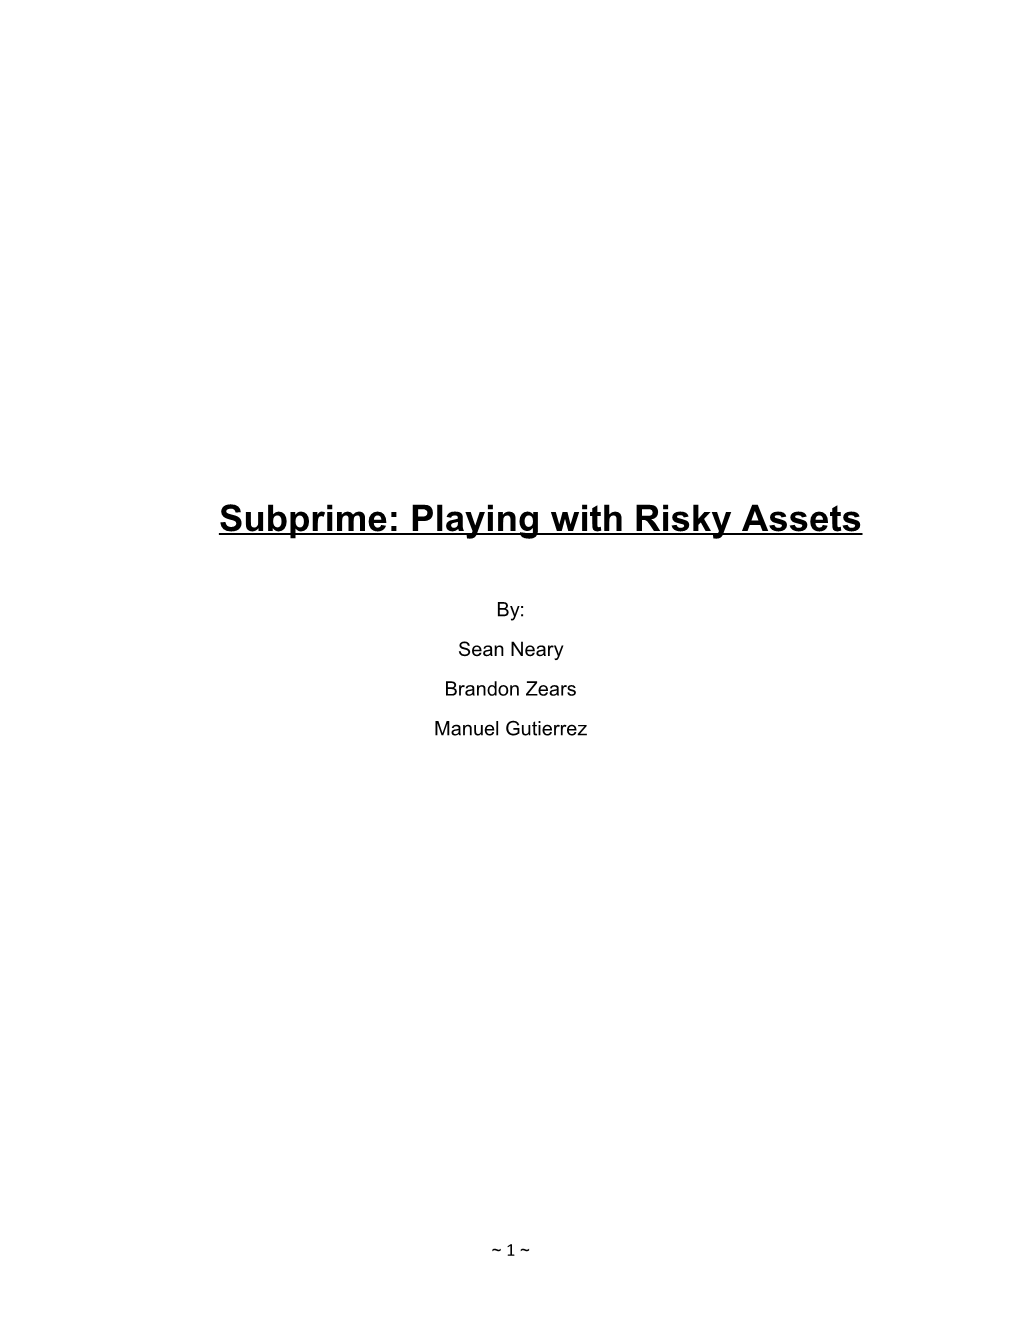 Subprime: Playing with Risky Assets